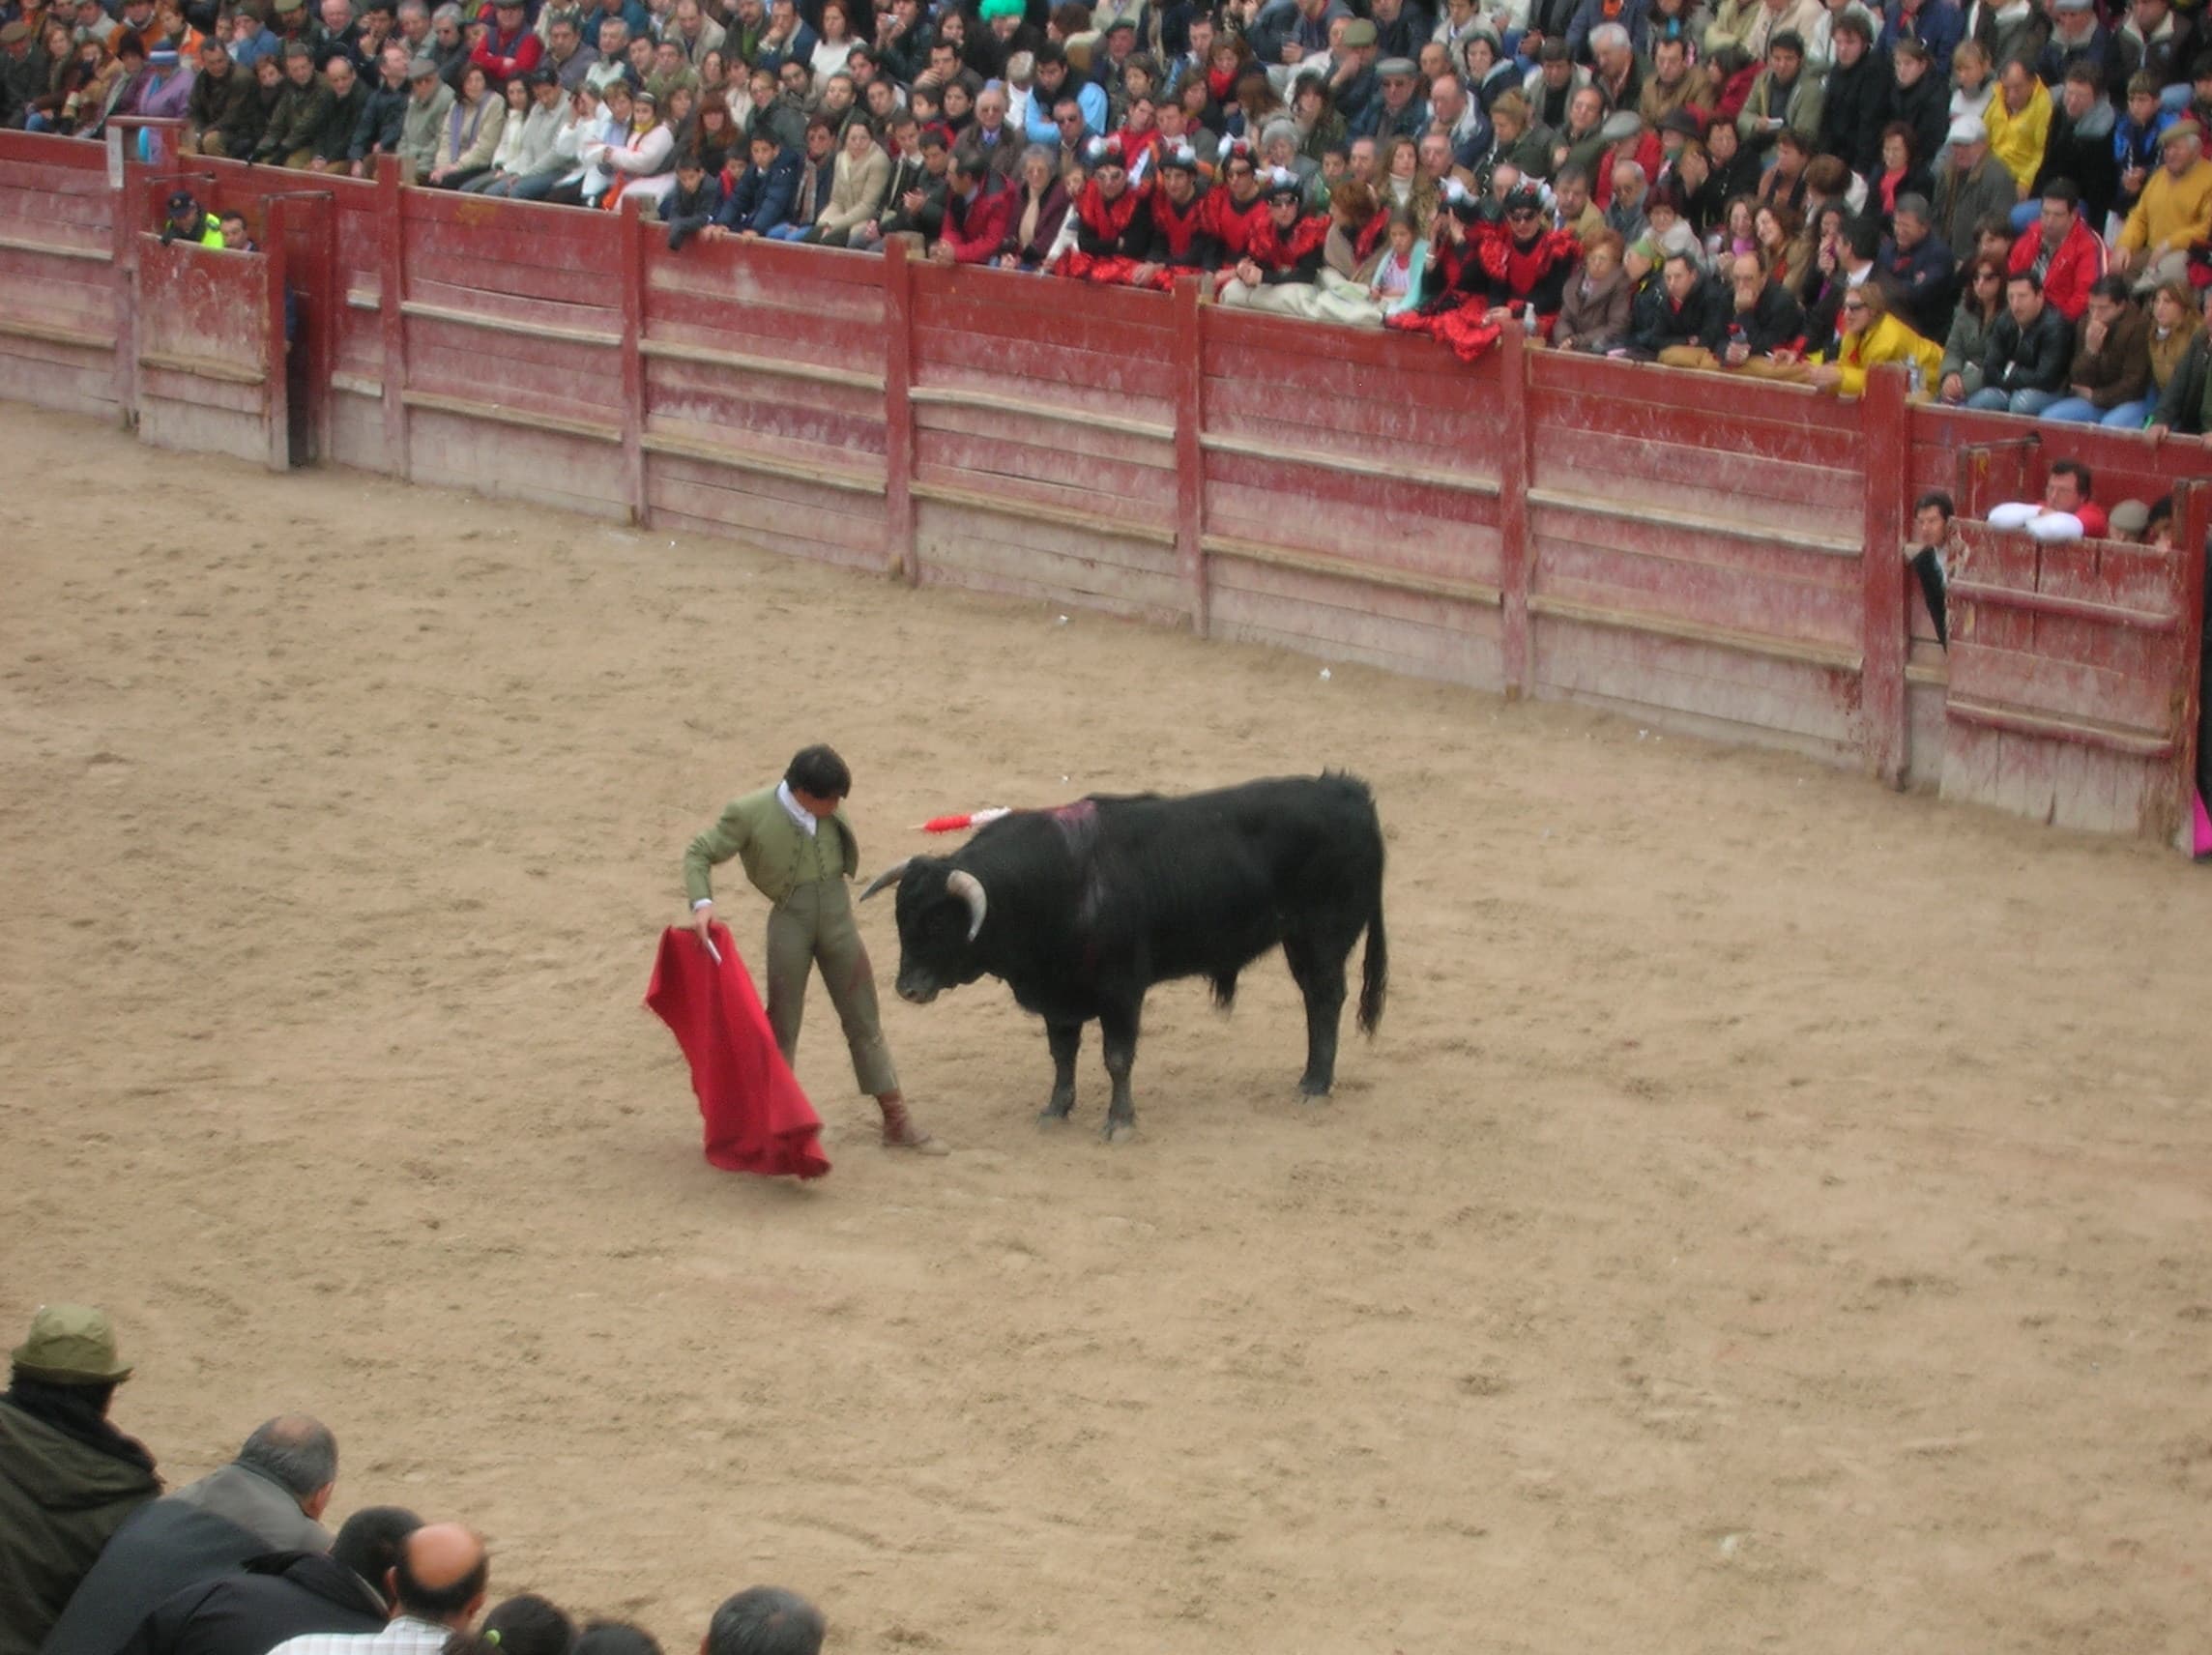 The bull is repeatedly stabbed by spears with red, decorative hilts